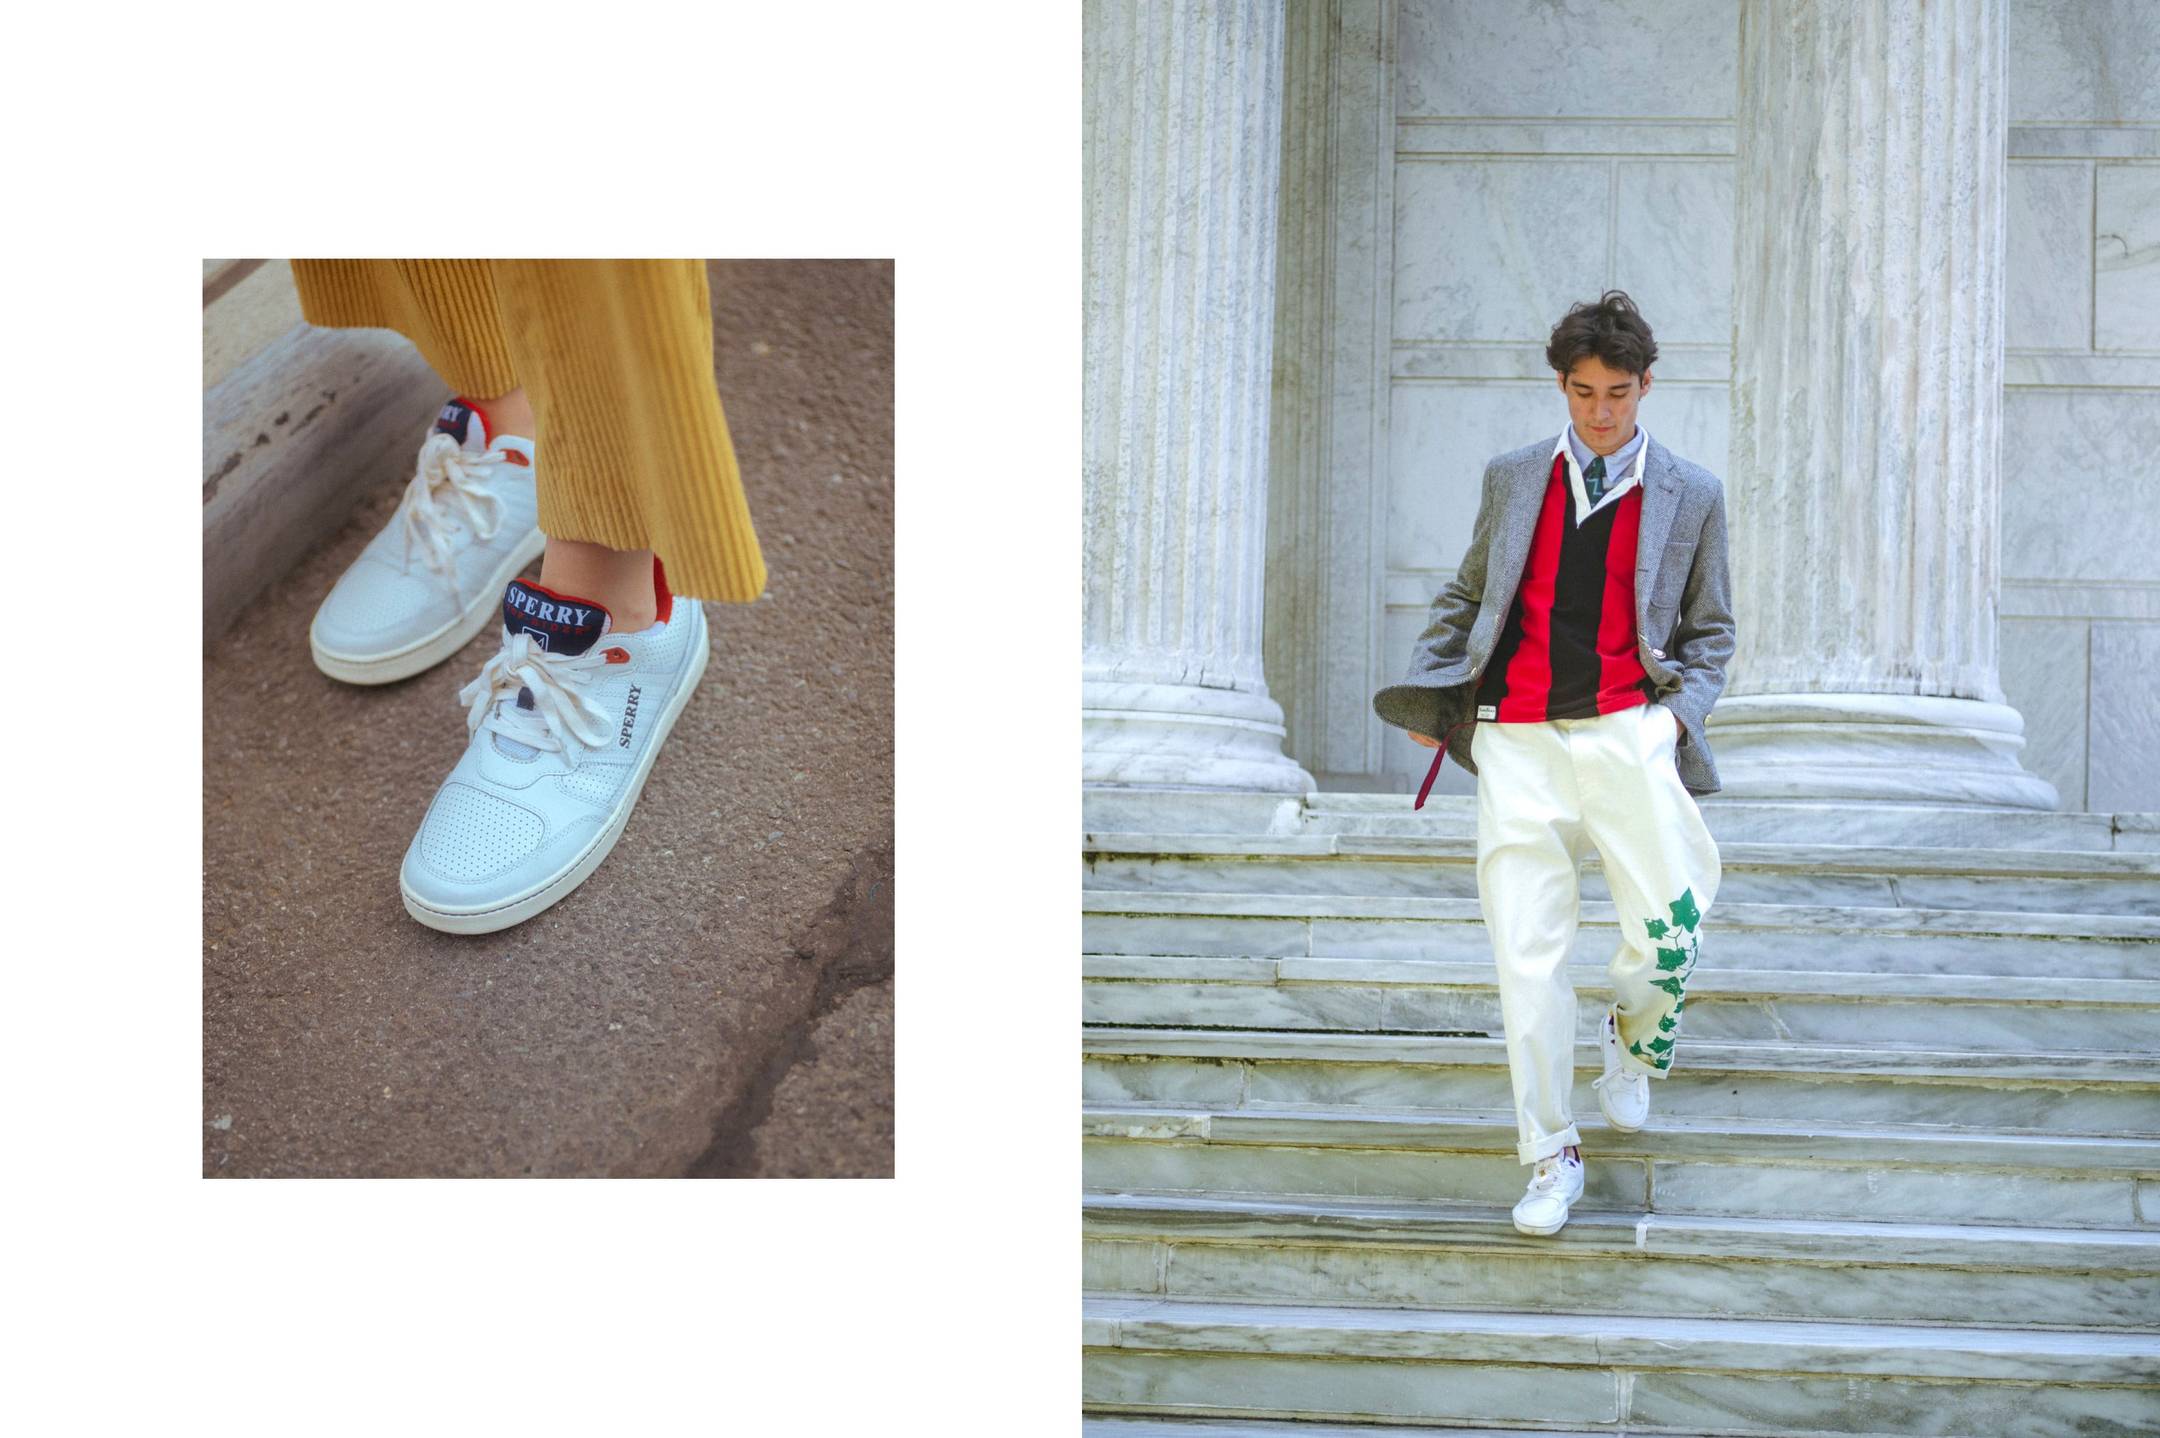 Female model wearing the Extra Soft Corduroy Wide Leg Trousers in gold and the Sperry x Rowing Blazers Cloud Cup Sneaker in navy and red. Male model wearing the Vertical Stripe Rugby in black and red and the Sperry x Rowing Blazers Cloud Cup Sneaker in gold and purple